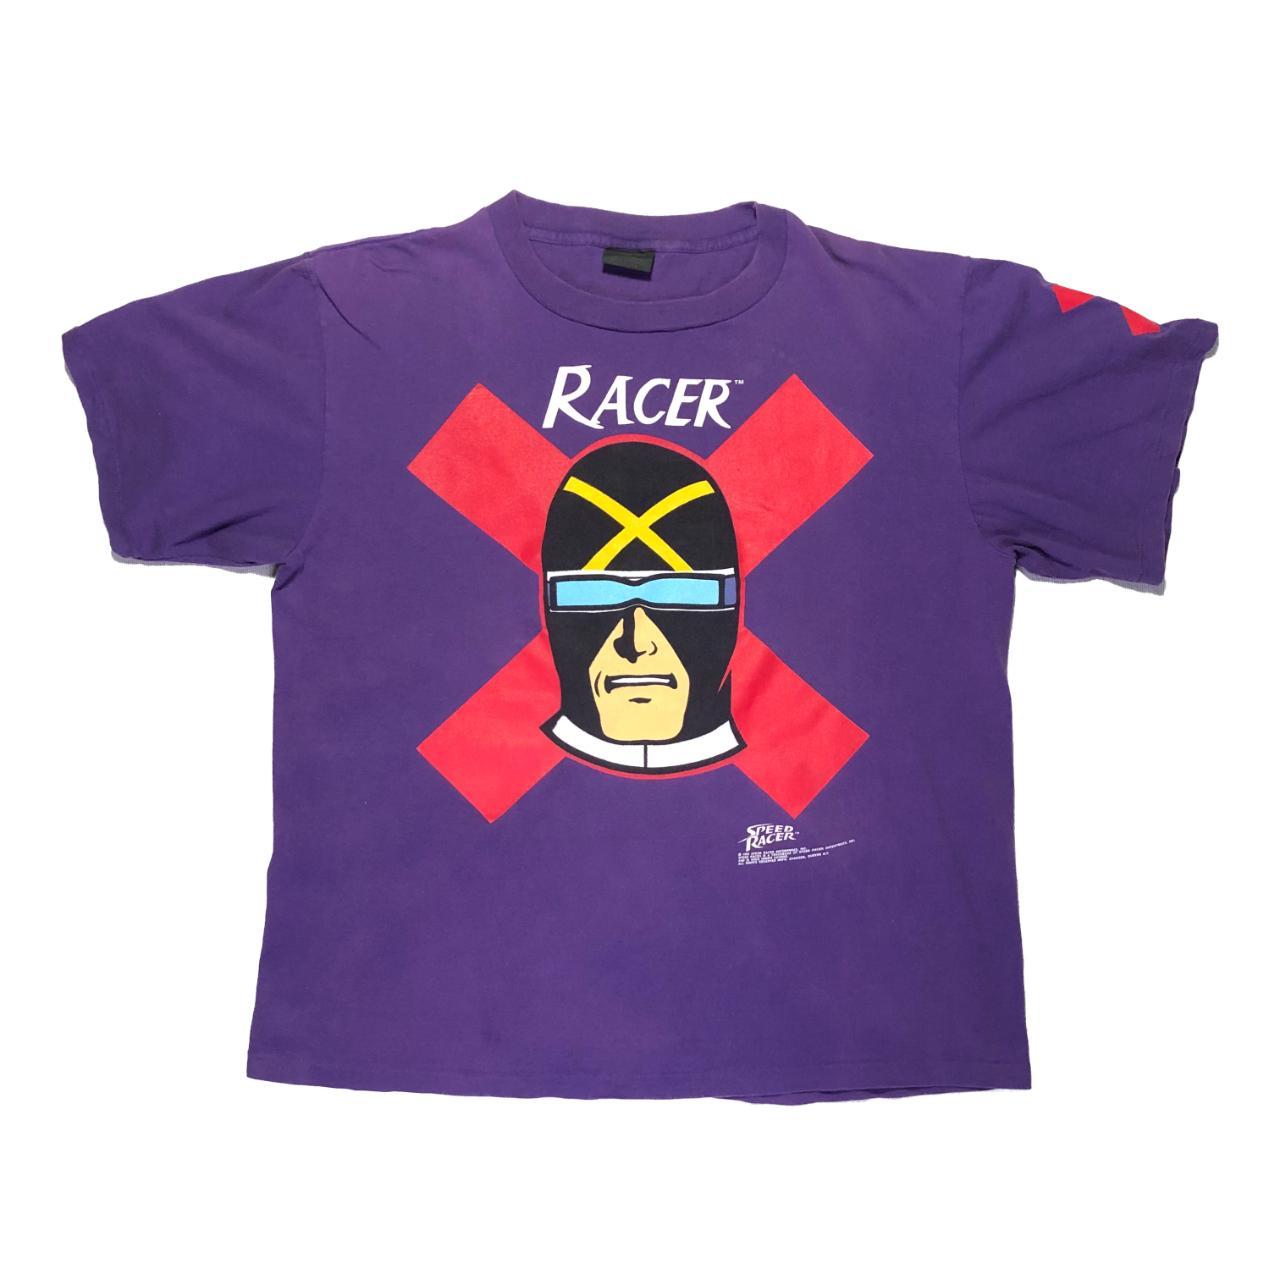 1992 Speed Racer T-Shirt in Purple, Single Stitch All...